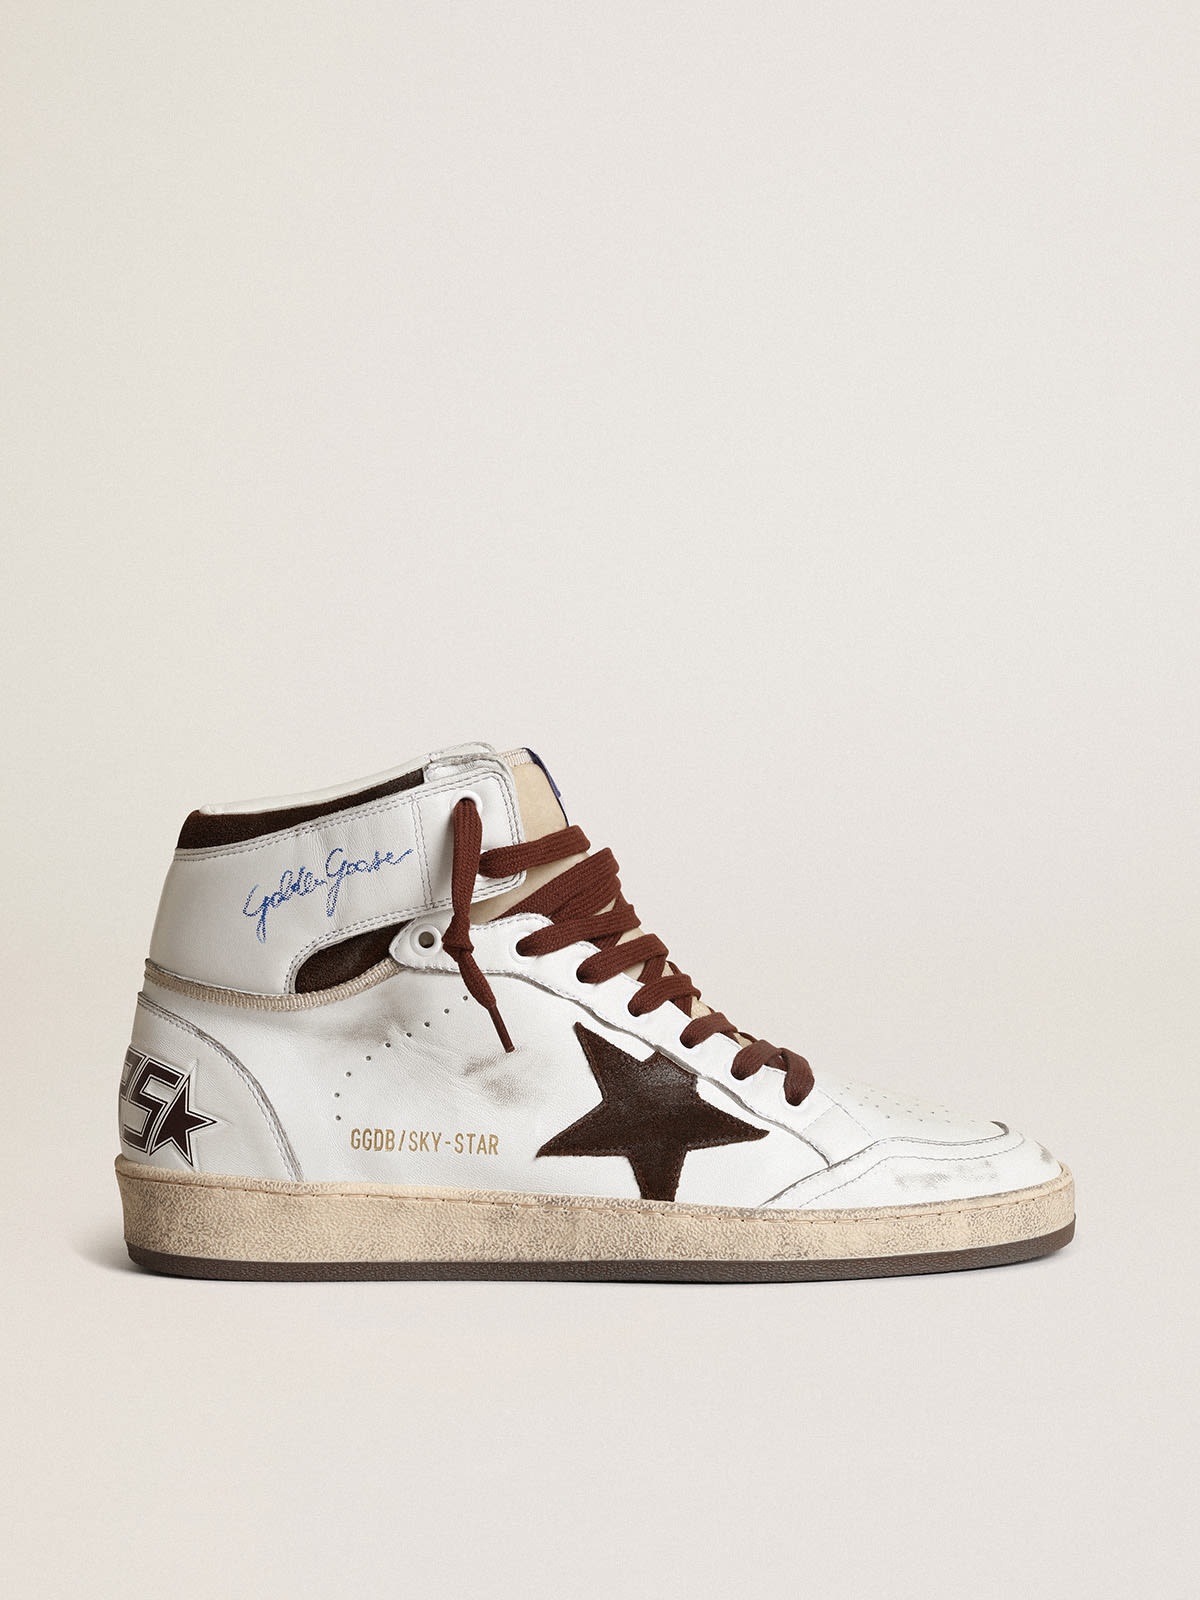 Men’s Sky-Star in white nappa leather with a chocolate suede star - 1